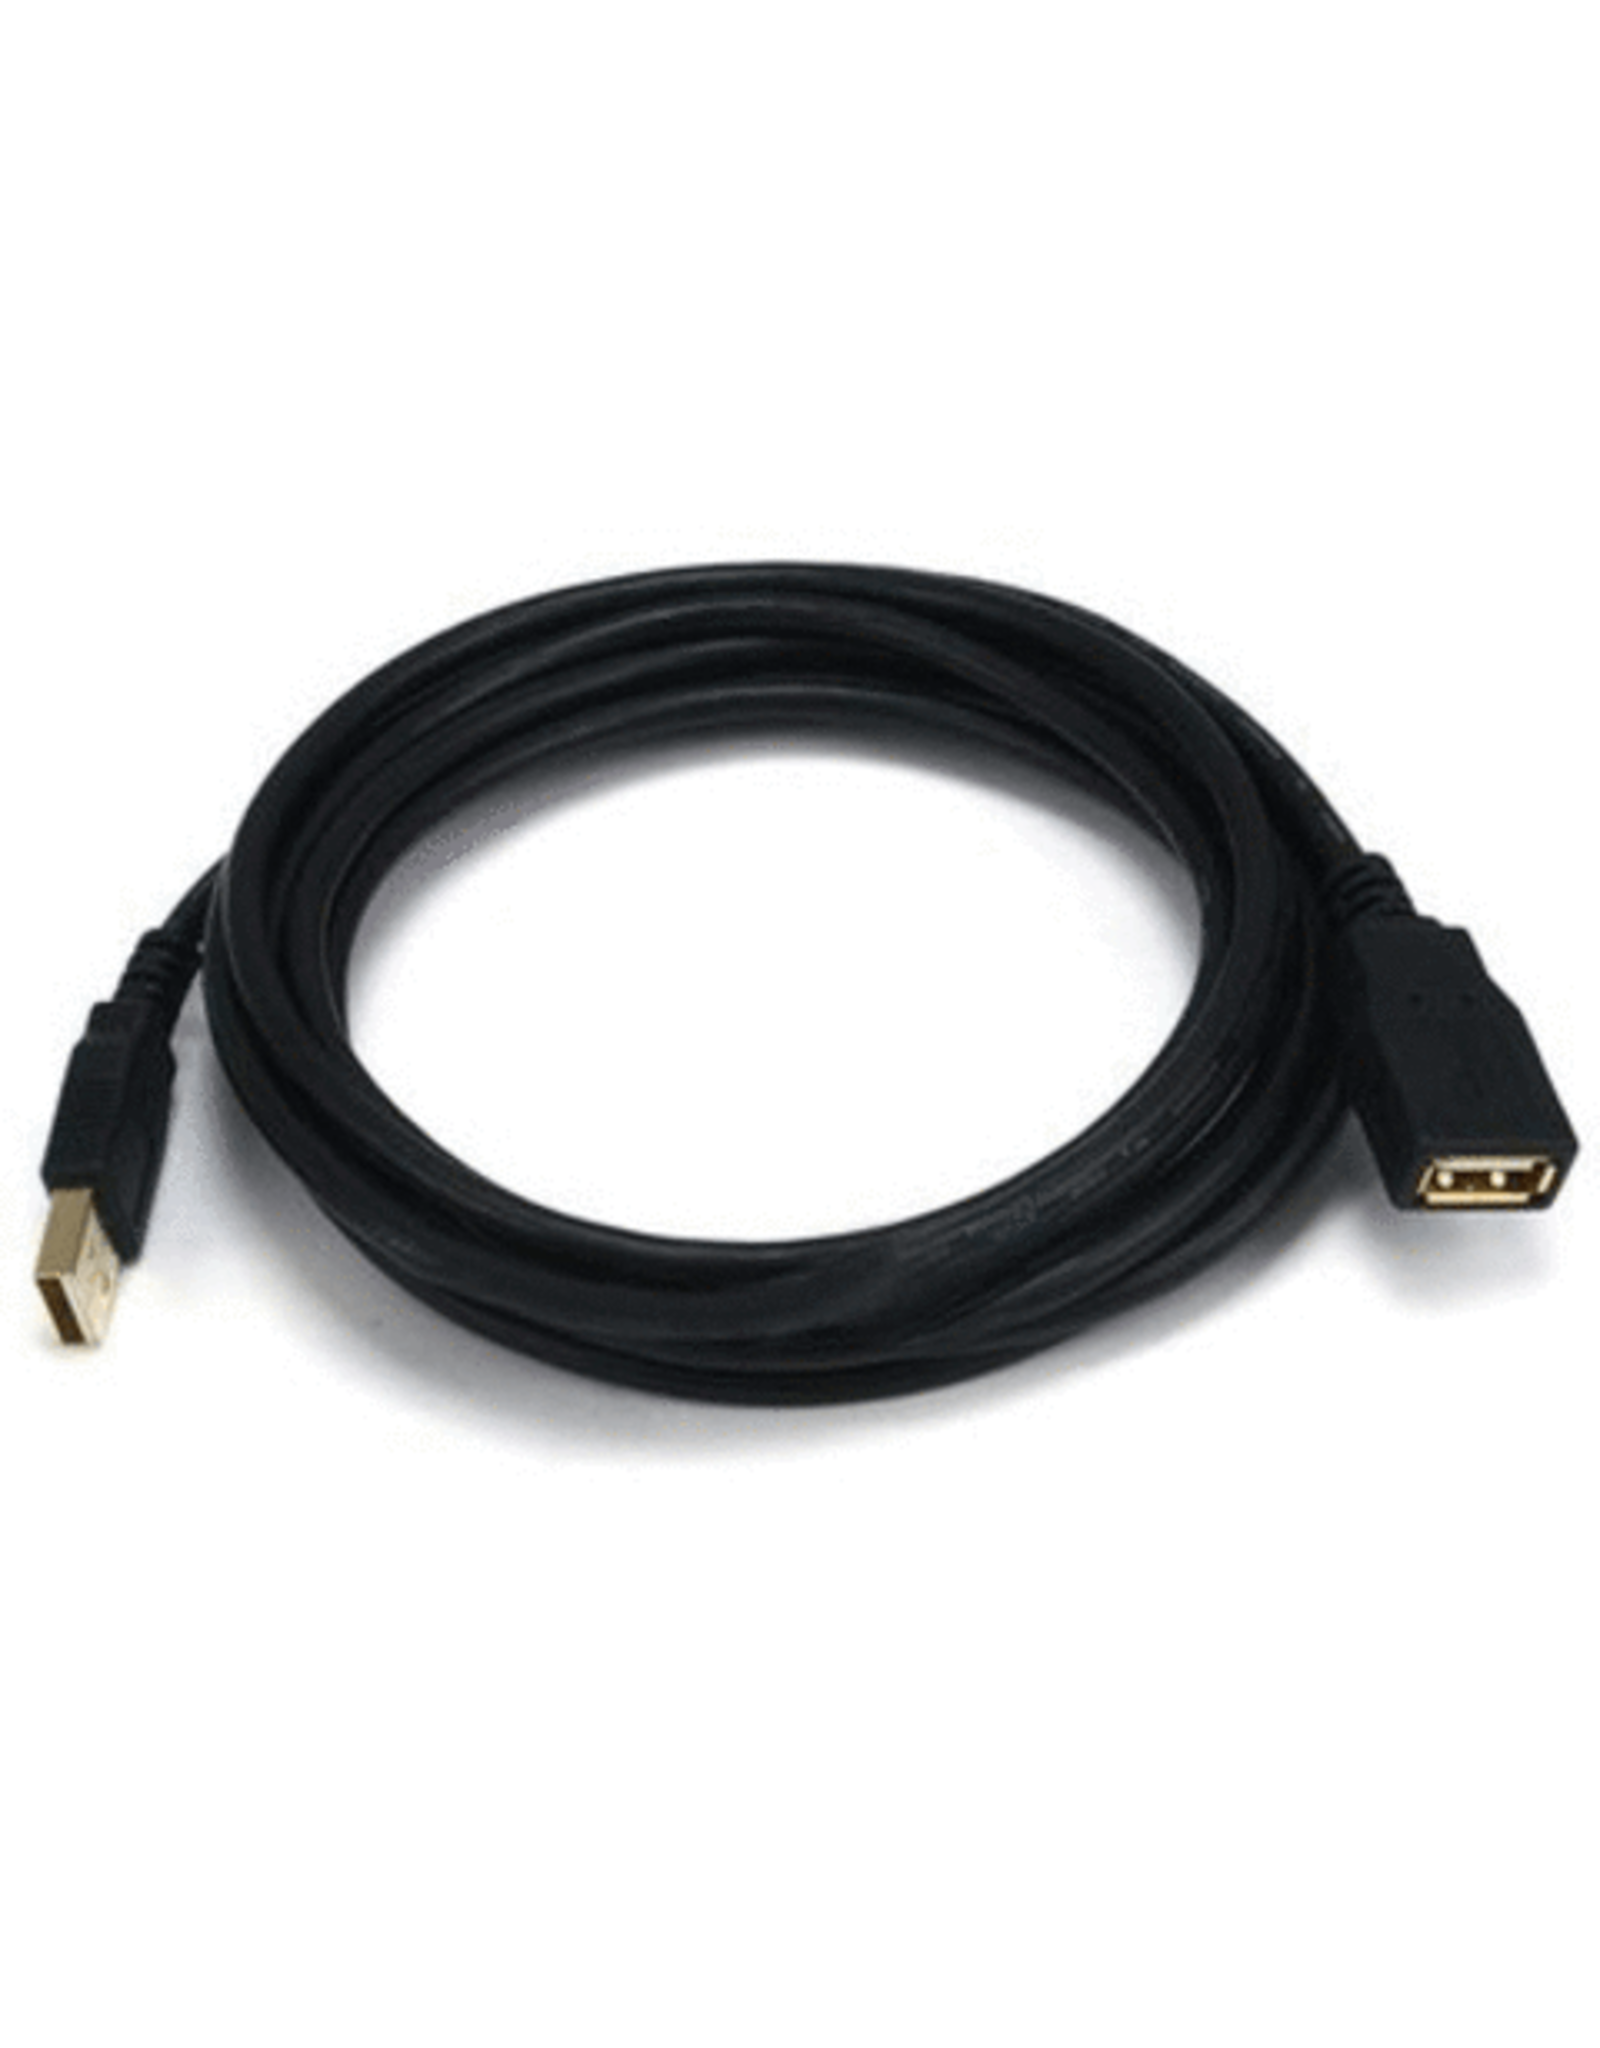 10ft USB 2.0 A Male to A Female Extension 28/24AWG Cable (Gold Plated)